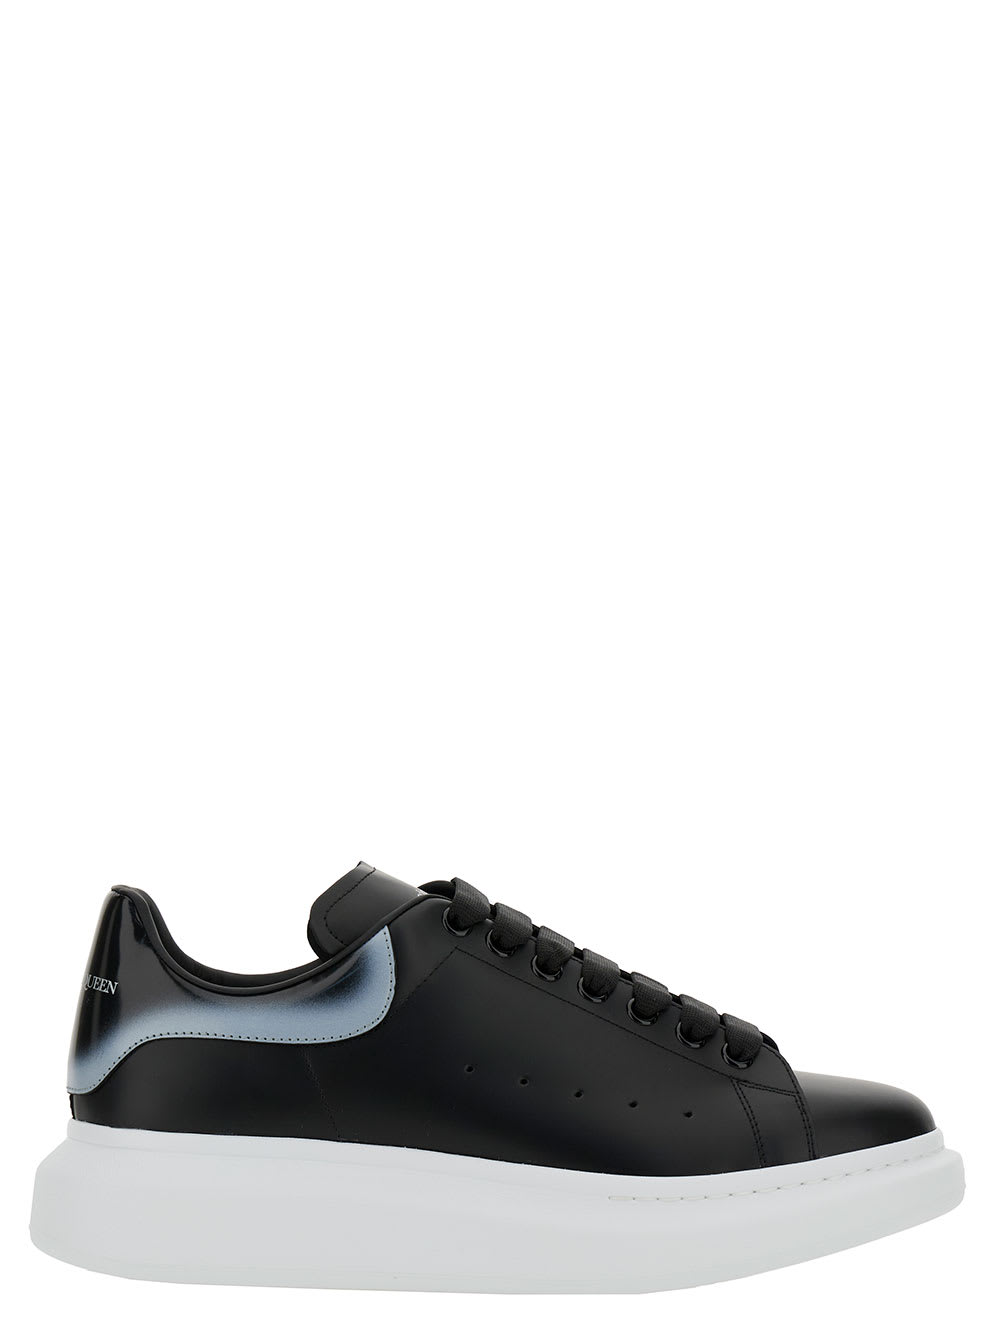 Shop Alexander Mcqueen Black Sneakers With Oversized Platform And Logo Detail In Leather Man